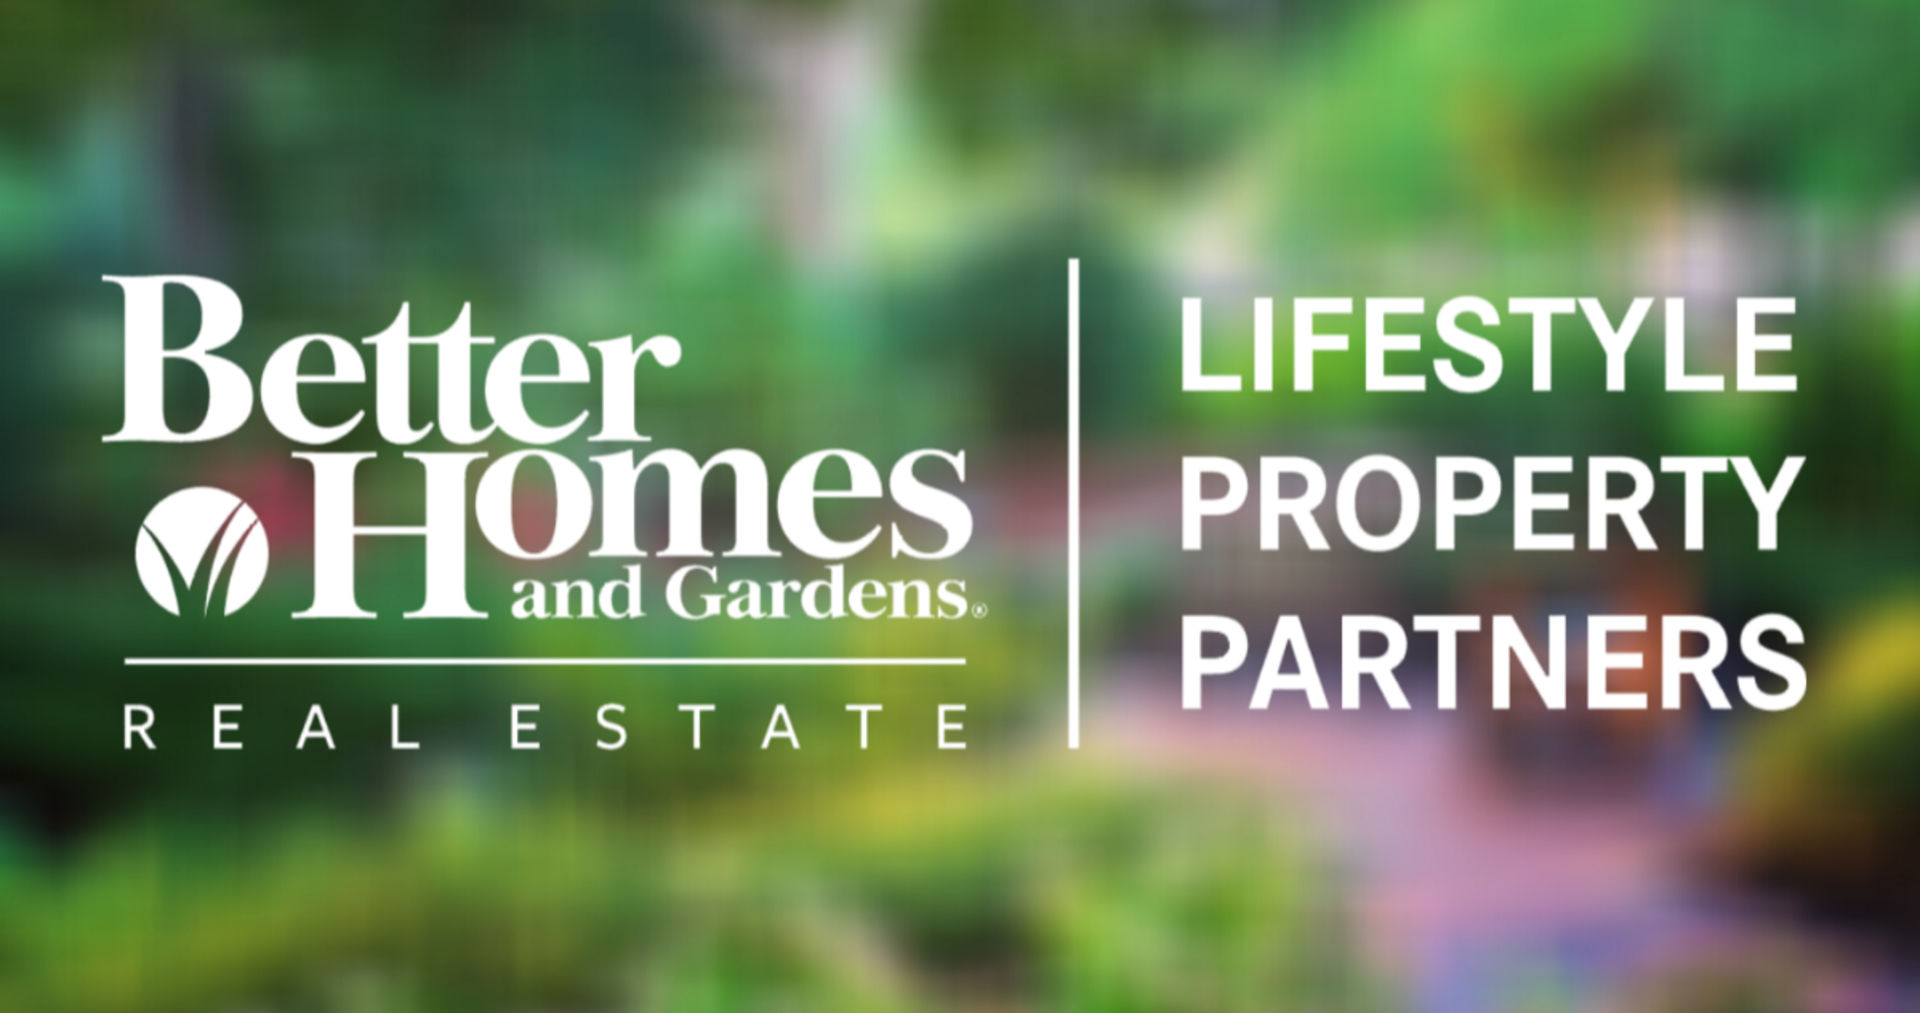 Pinehurst Real Estate Better Homes And Gardens Real Estate Lifestyle Property Partners